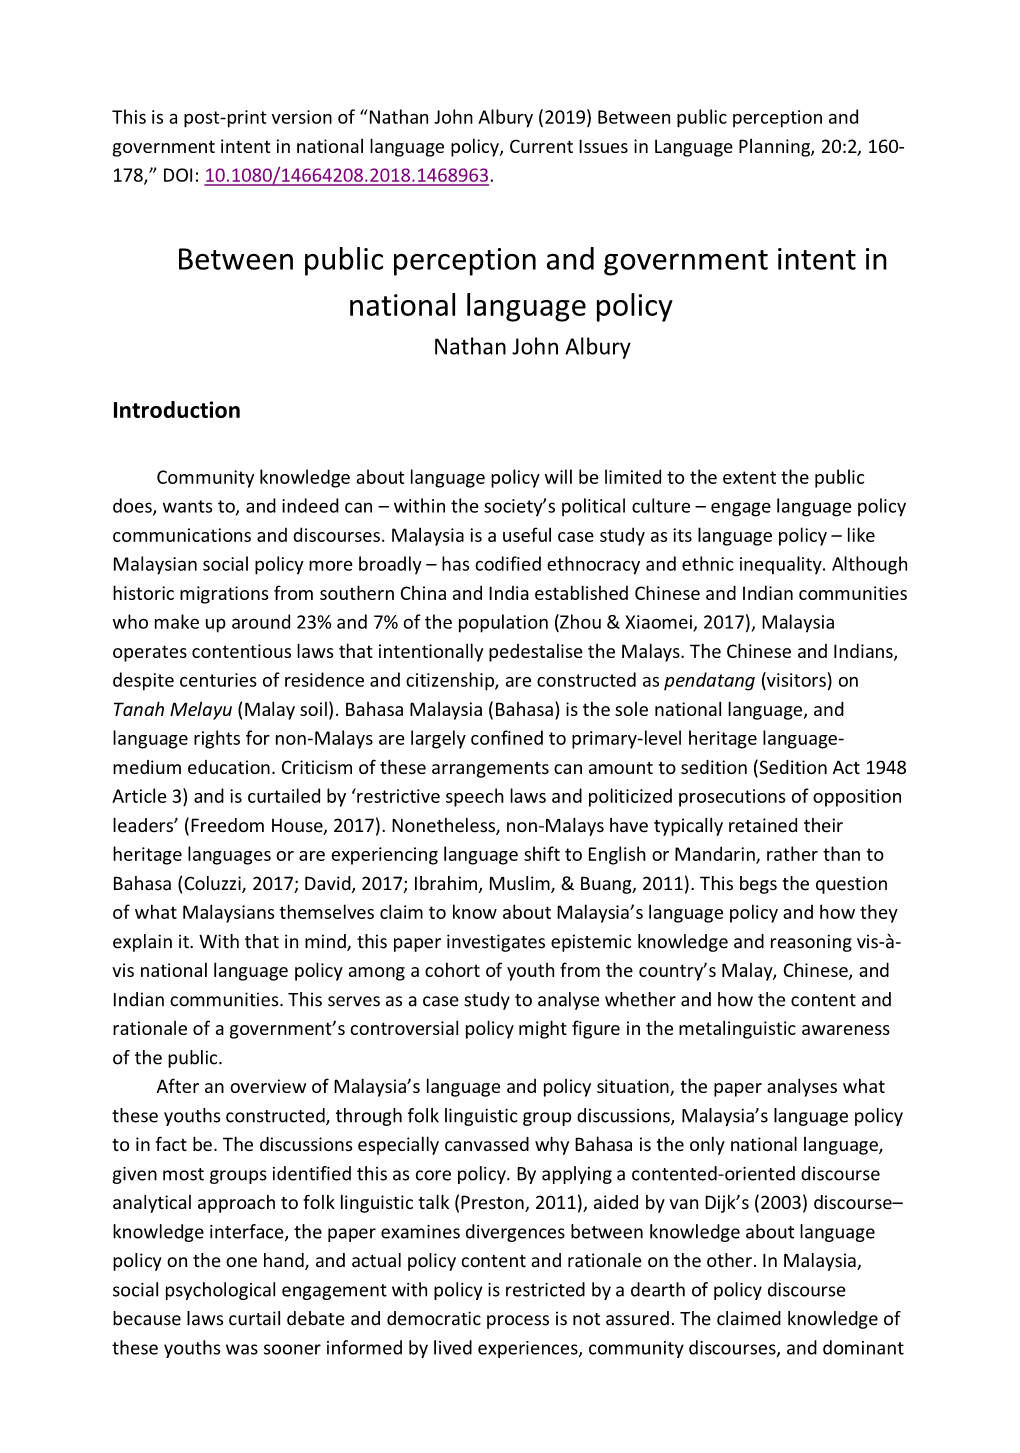 Between Public Perception and Government Intent in National Language Policy, Current Issues in Language Planning, 20:2, 160- 178,” DOI: 10.1080/14664208.2018.1468963